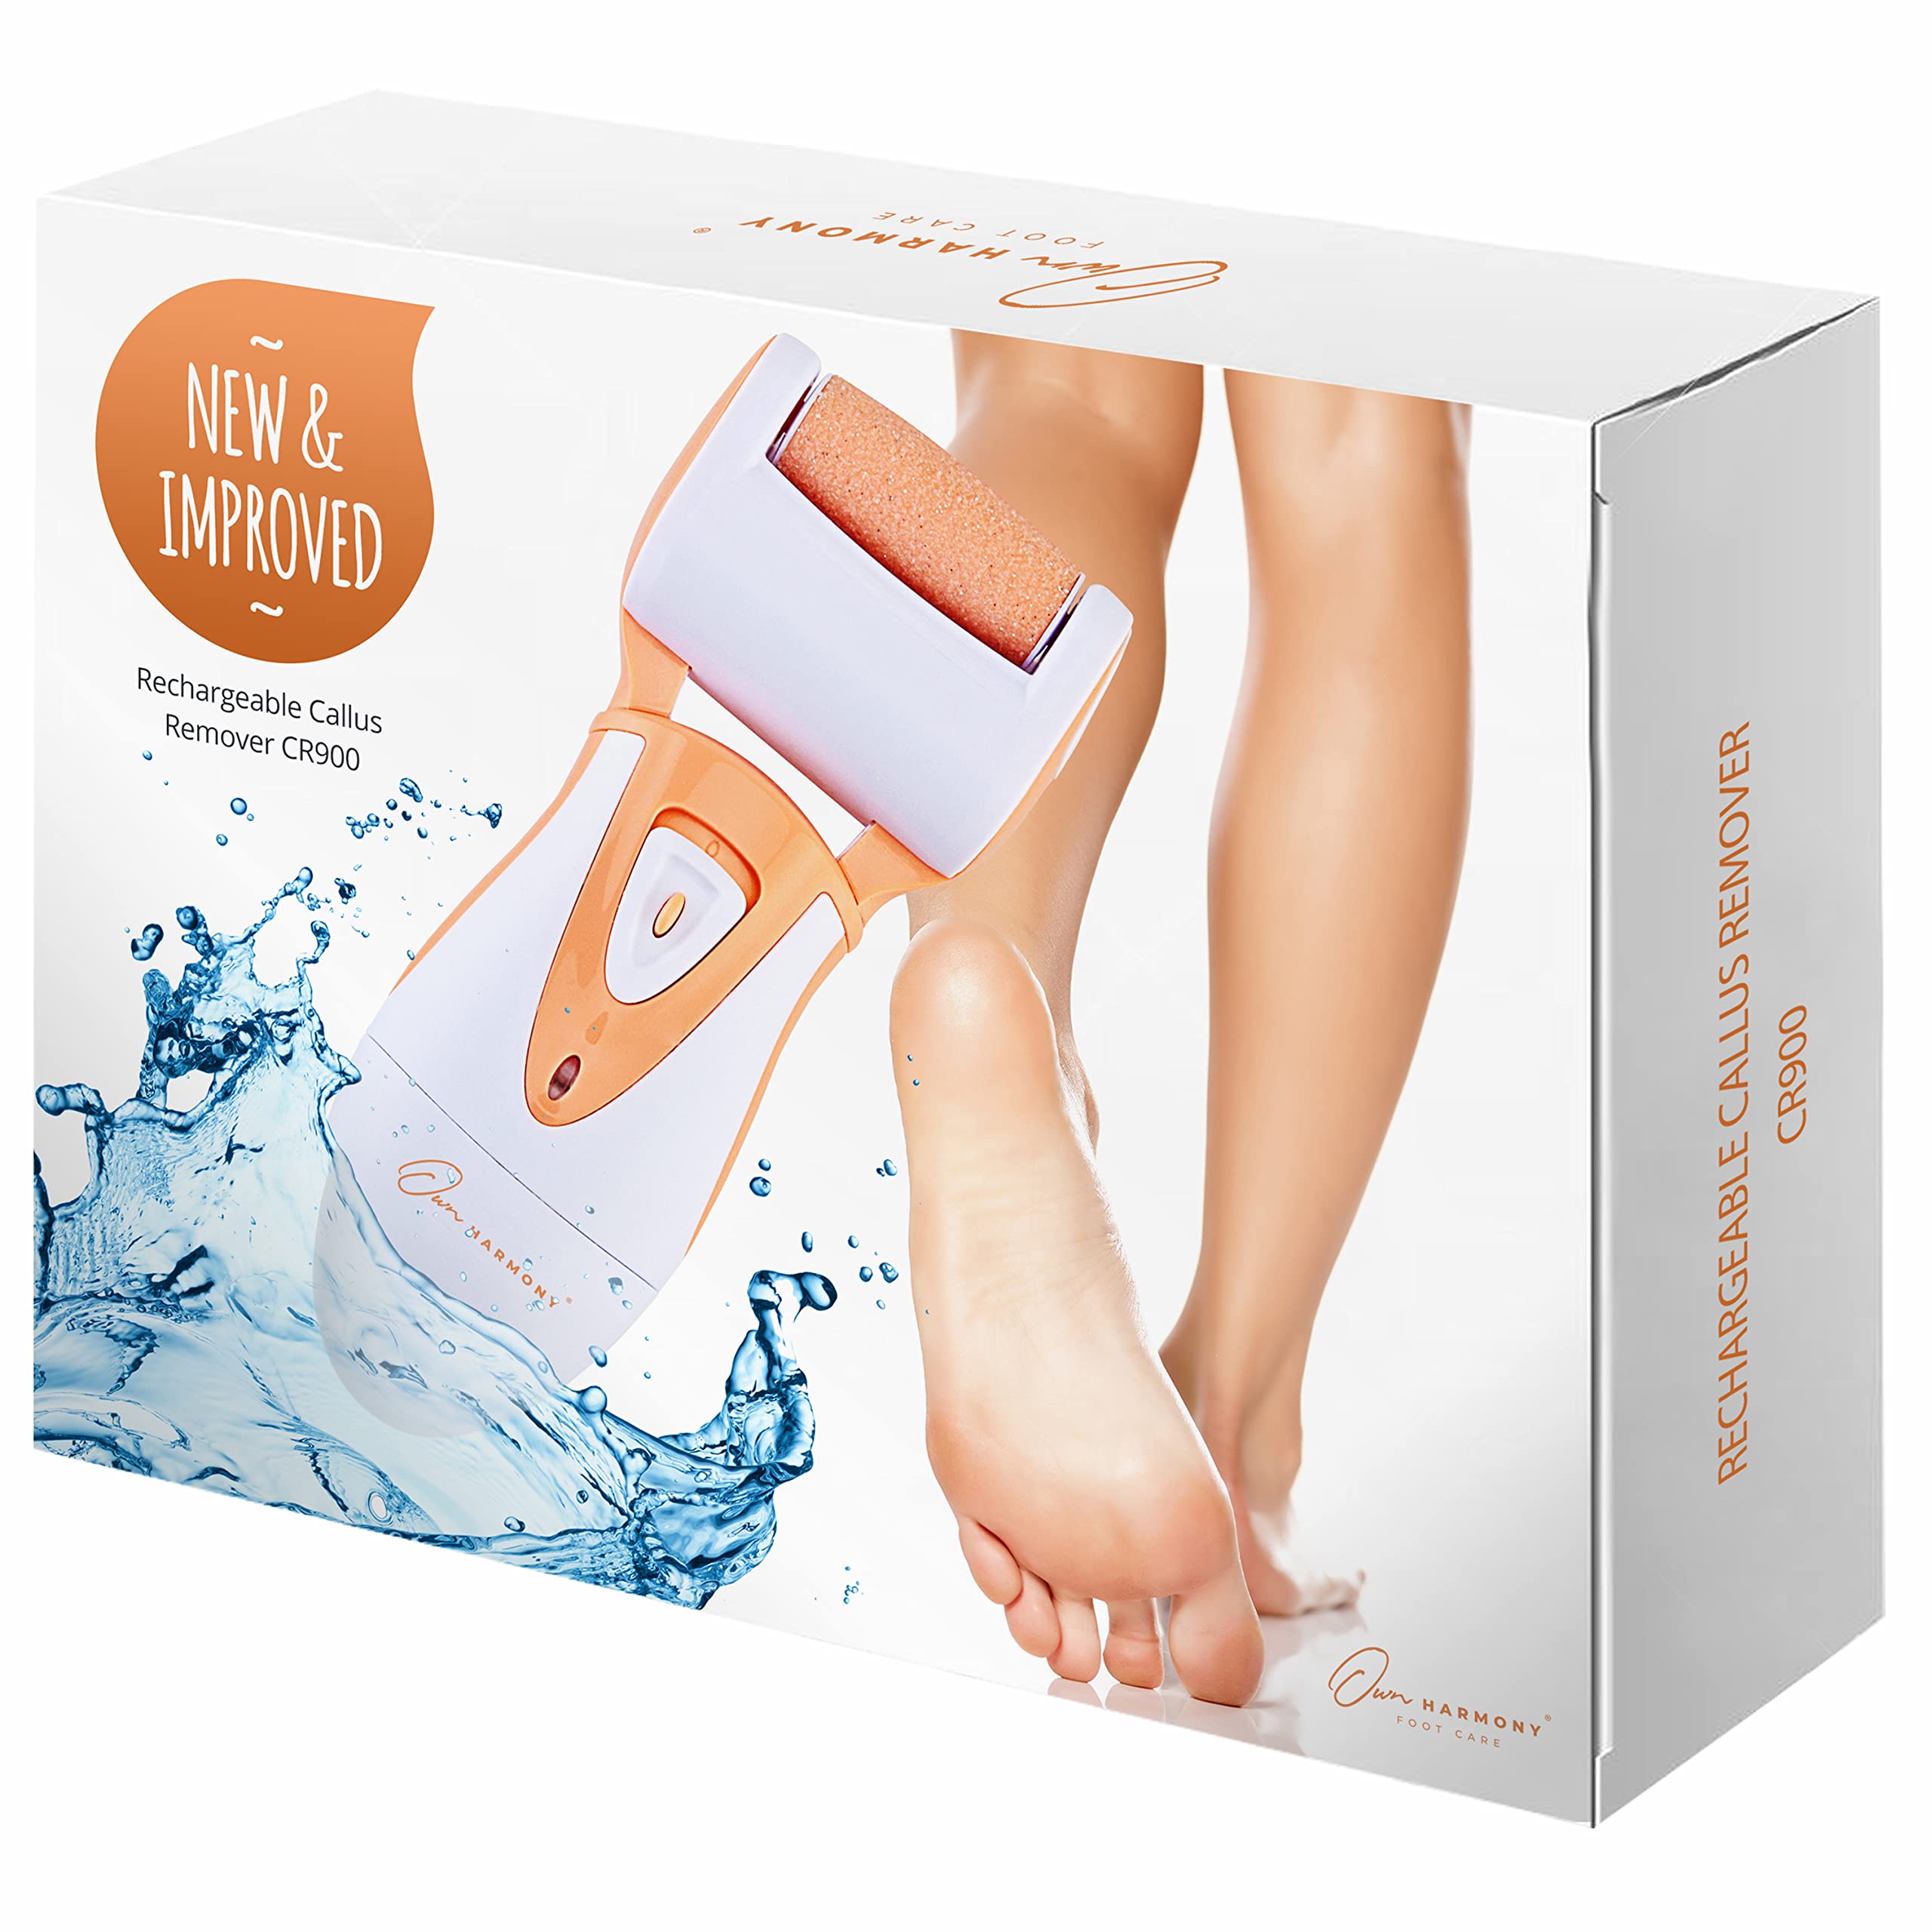 Amazon.com : Own Harmony Professional Foot Care for Women